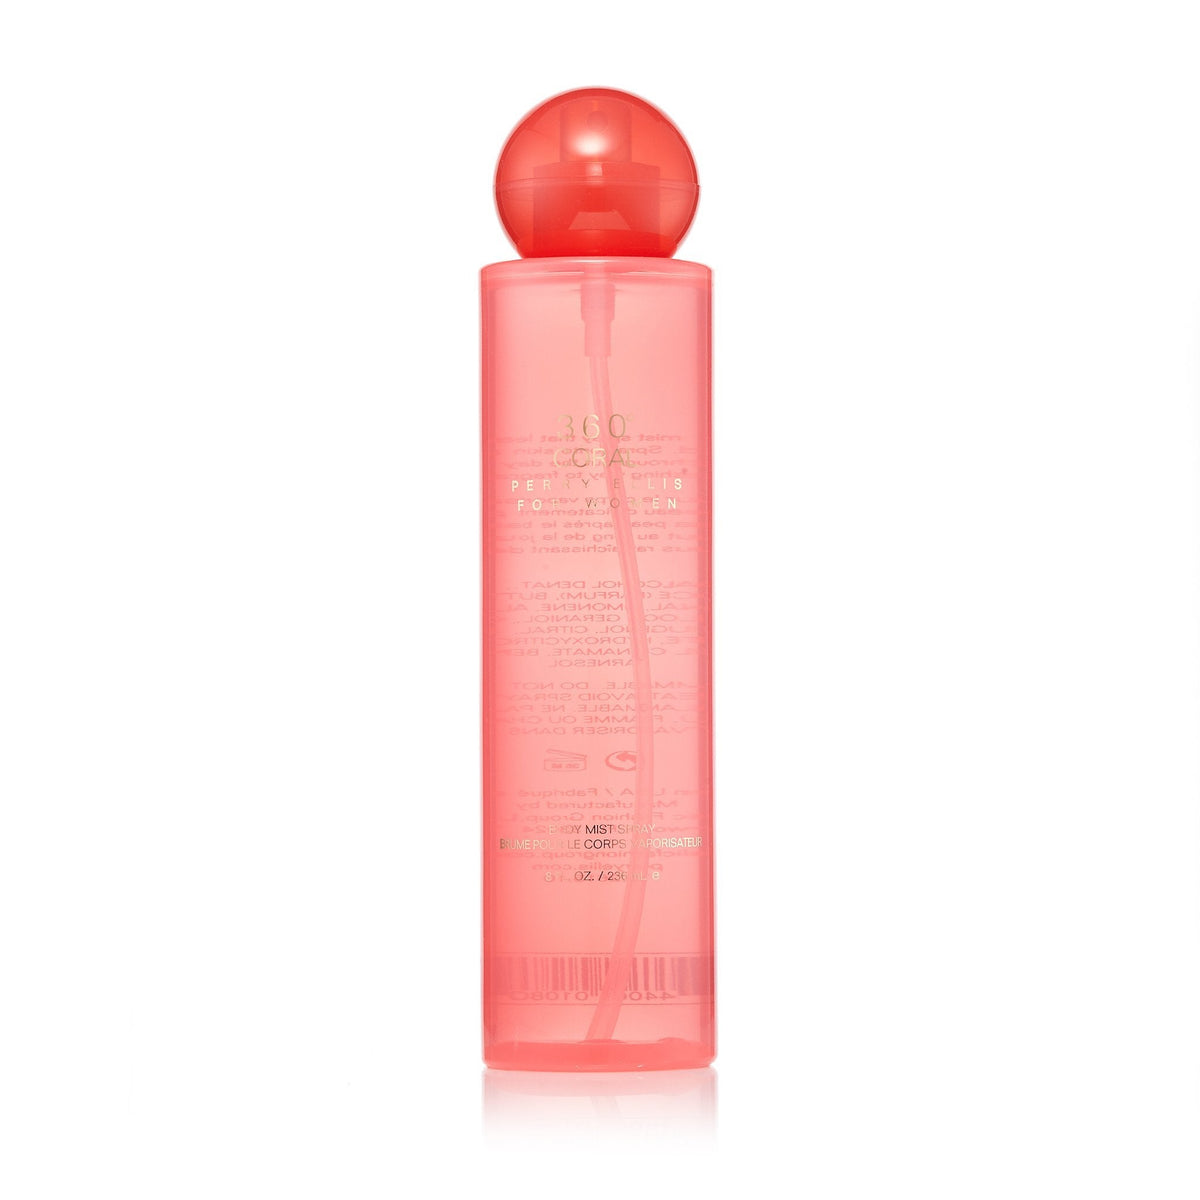 360° Coral Body Spray for Women by Perry Ellis 8.0 oz.